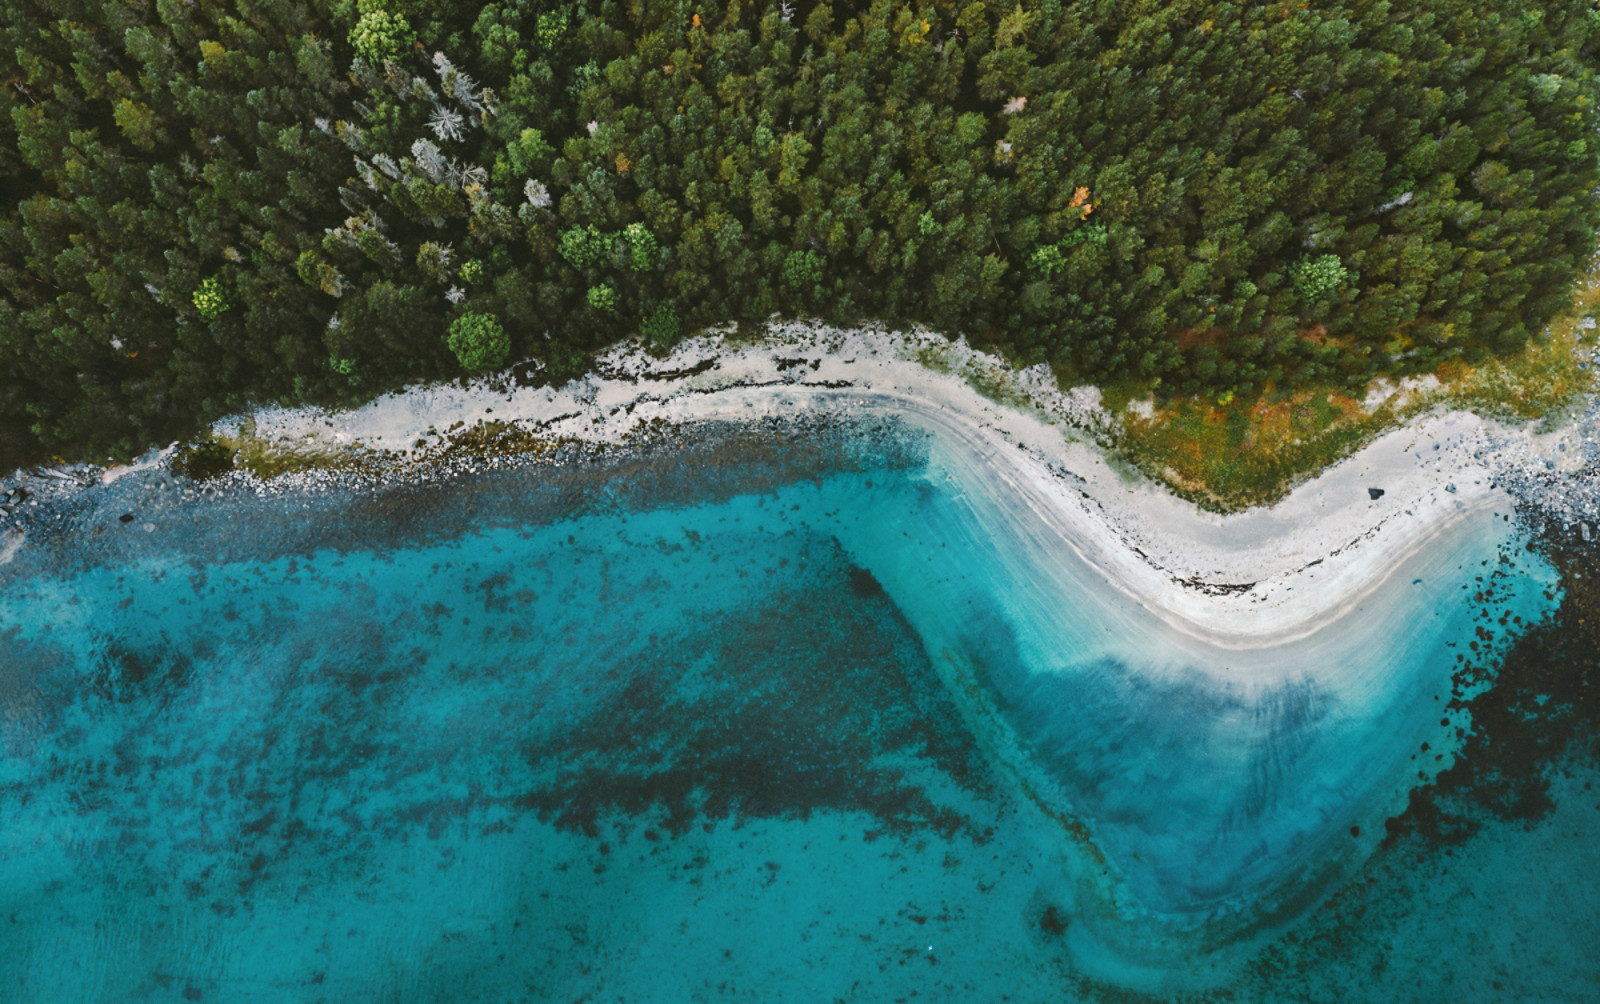 Aerial view ocean sandy beach and coniferous forest drone landscape in Norway above trees and blue sea water scandinavian nature wilderness top down scenery ; Shutterstock ID 1737327275; purchase_order: -; job: -; client: -; other: -